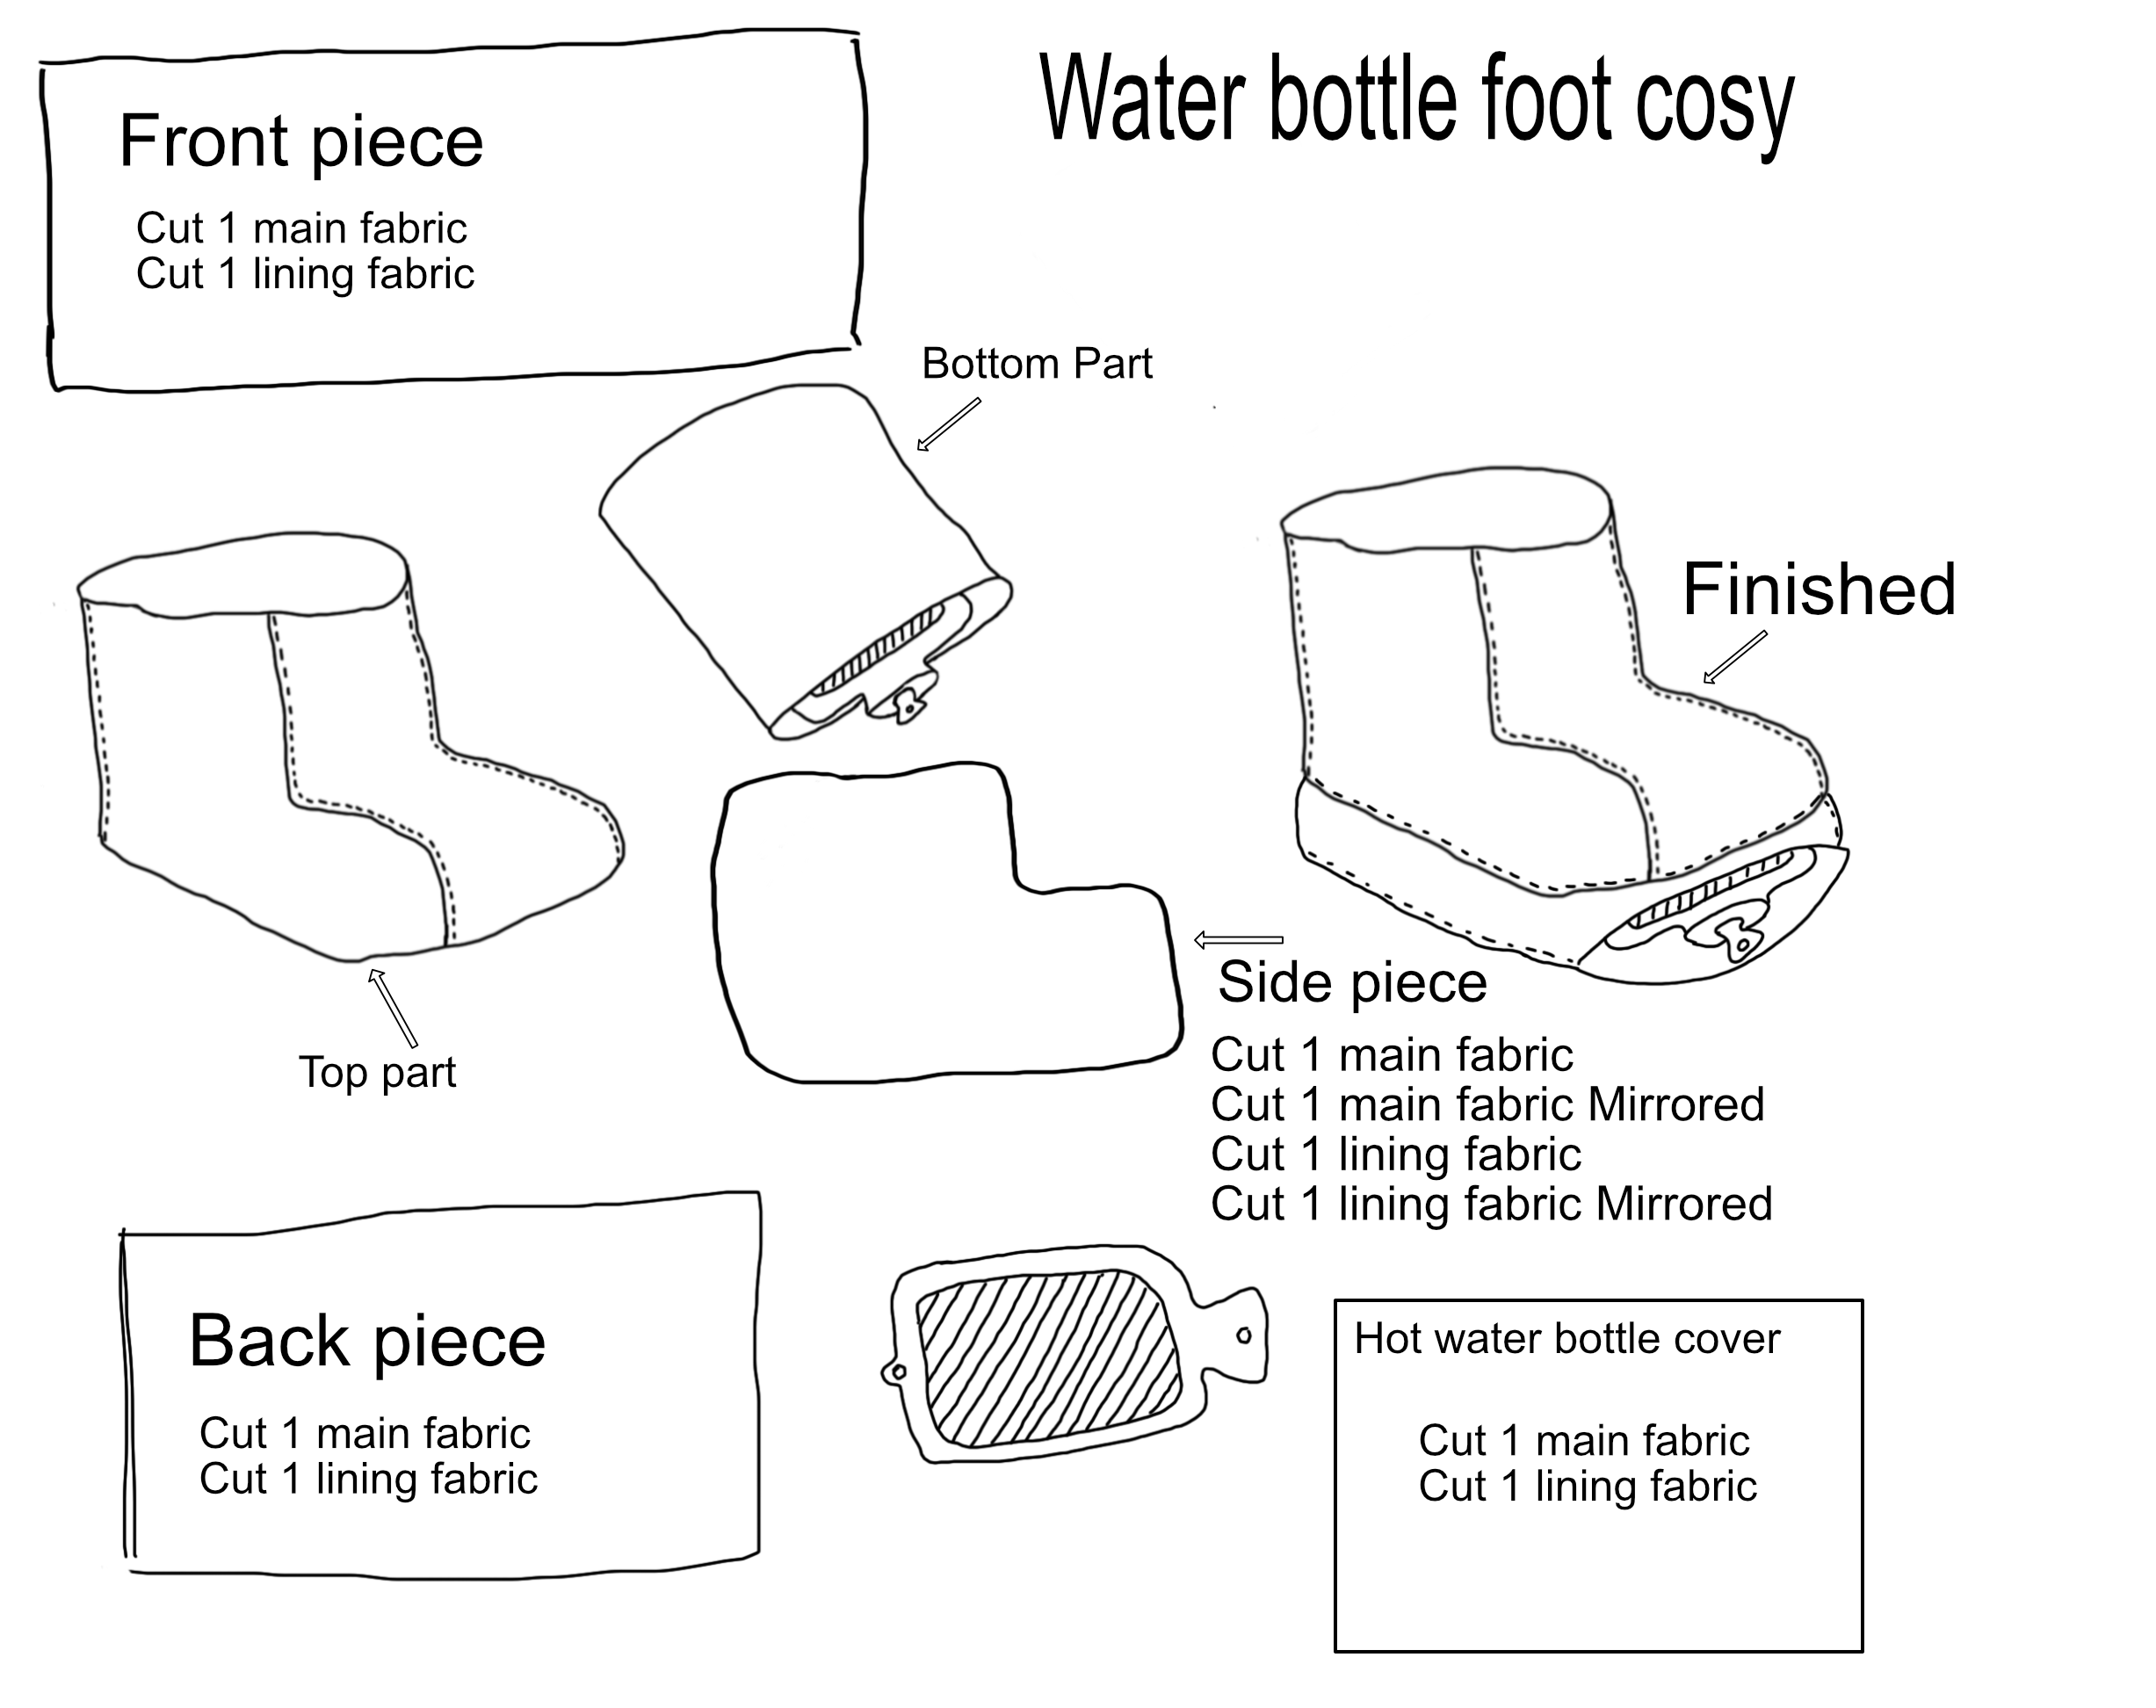 Foot cosy Plan.png